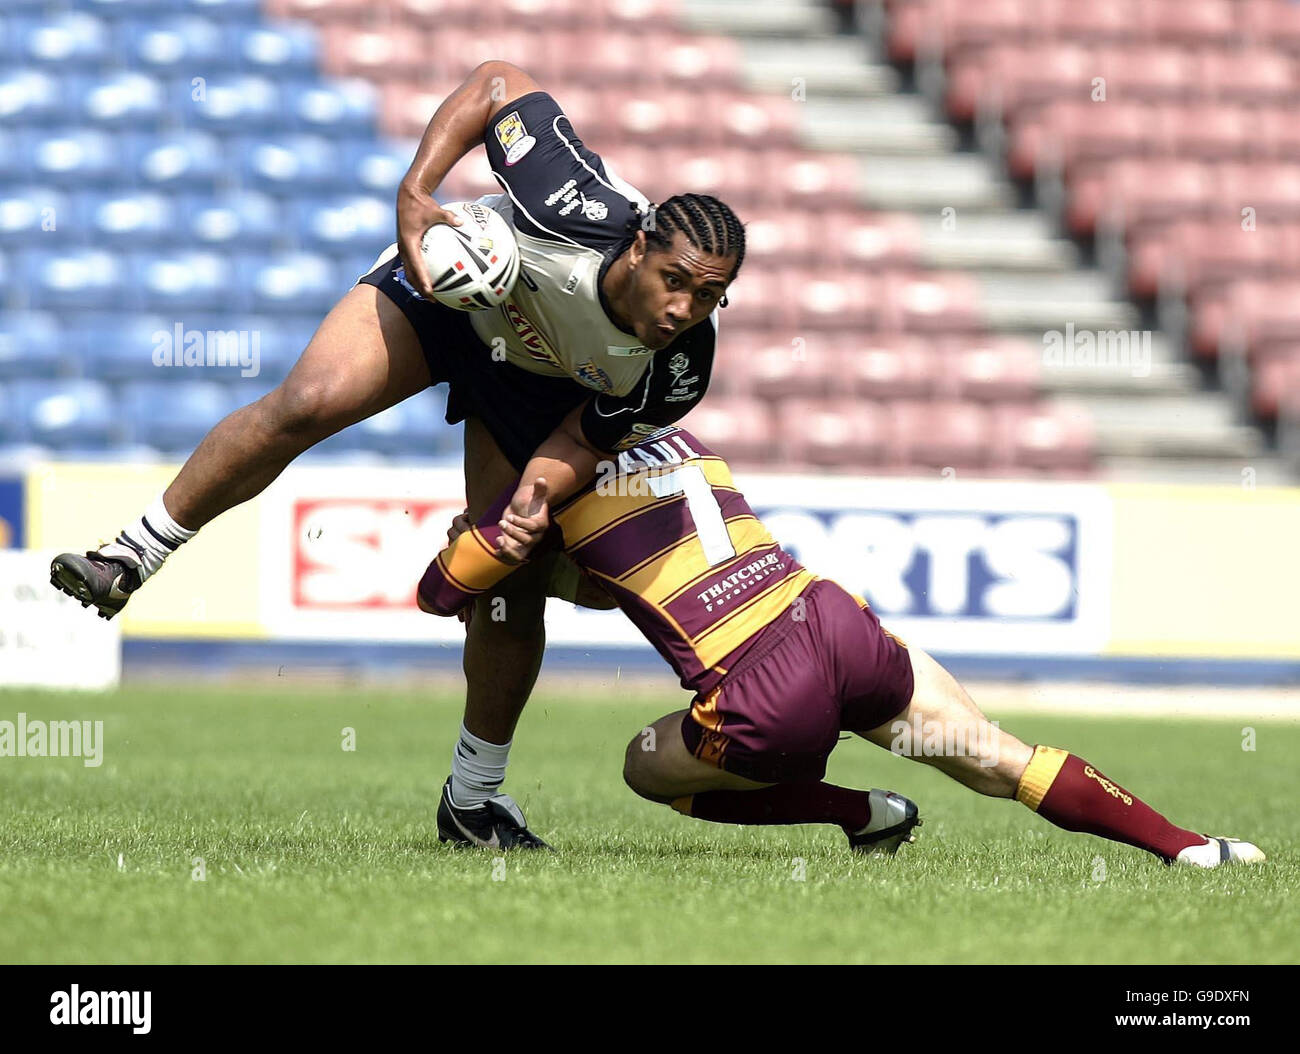 Leeds' Ali Lauitiiti (left) is tackled by Huddersfield's Robbie Paul during the Engage Super League match at Galpharm Stadium, Huddersfield. Stock Photo